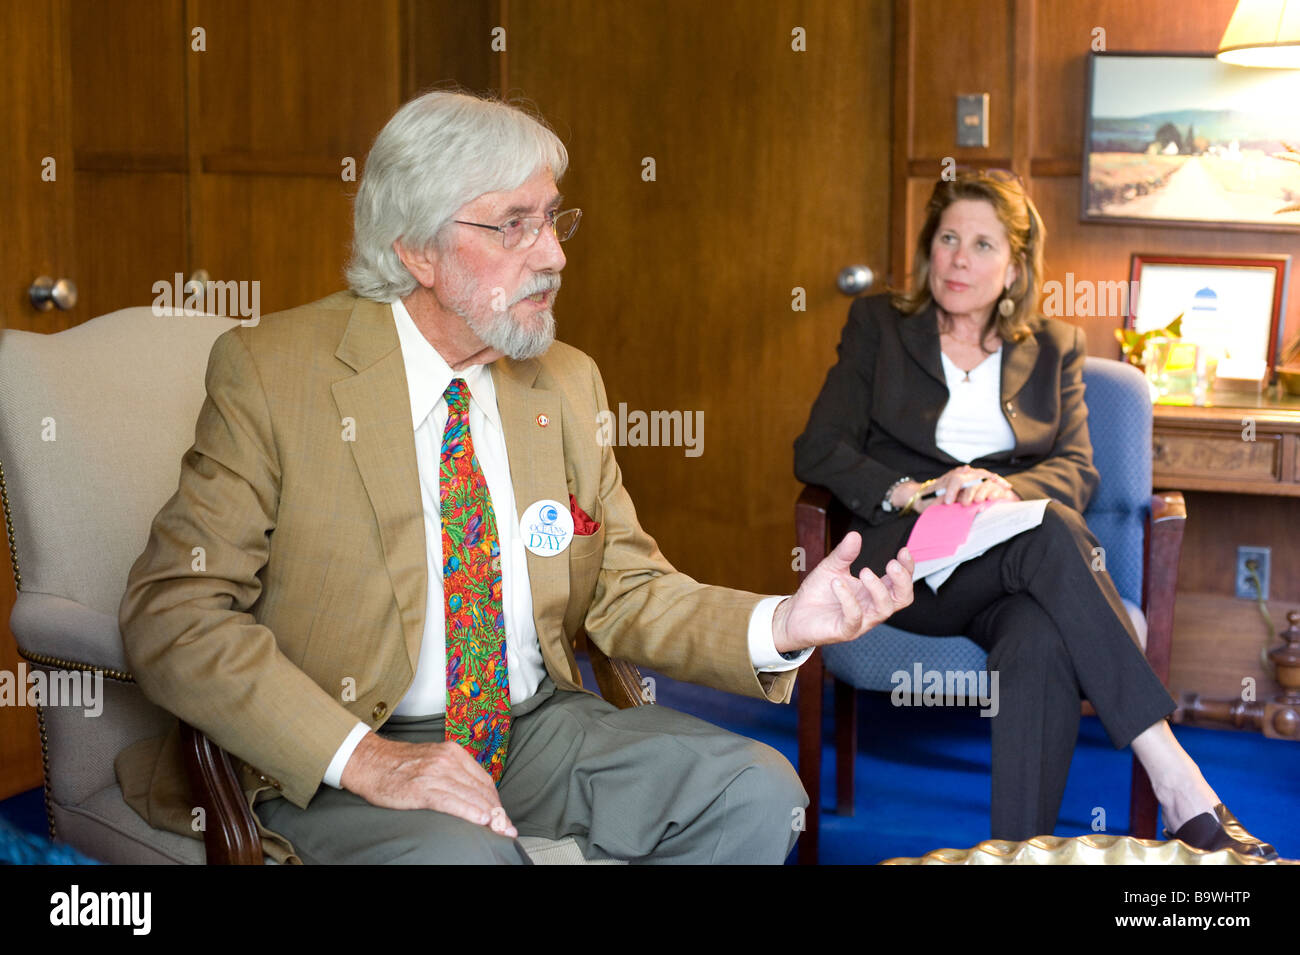 Jean-Michel Cousteau speaks with the Lieutenant Governor of California in the California state capitol building Stock Photo